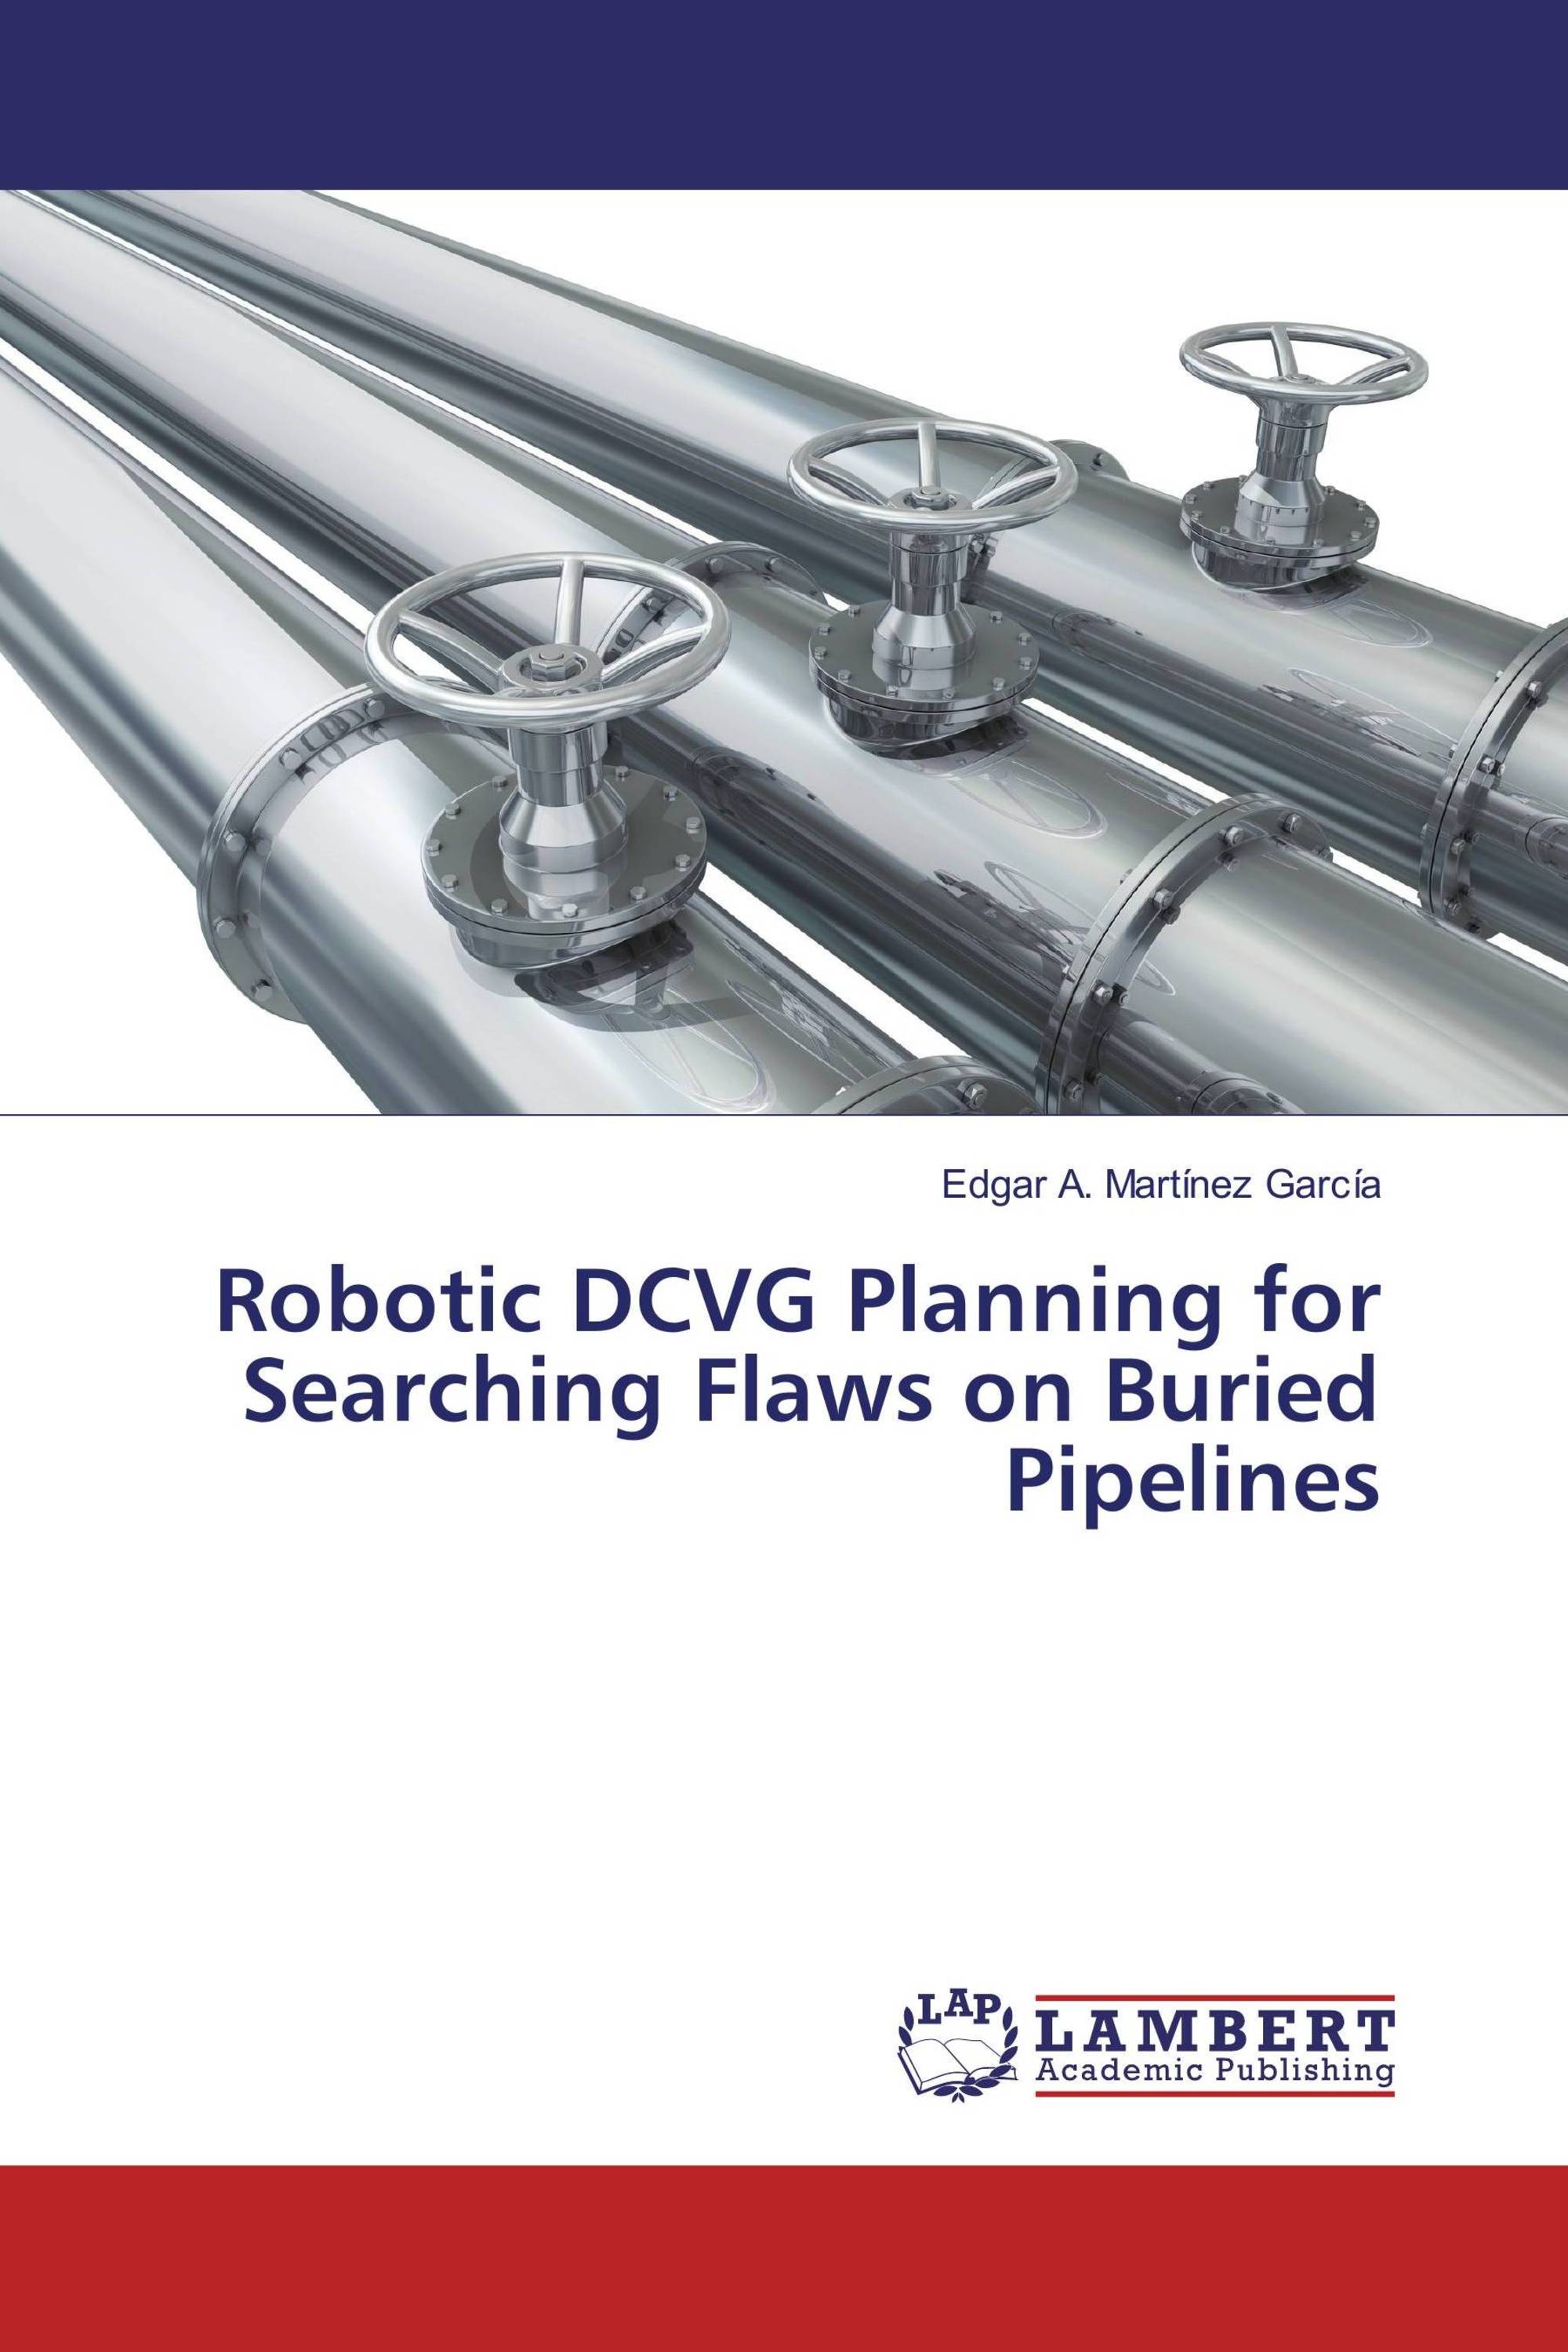 Robotic DCVG Planning for Searching Flaws on Buried Pipelines